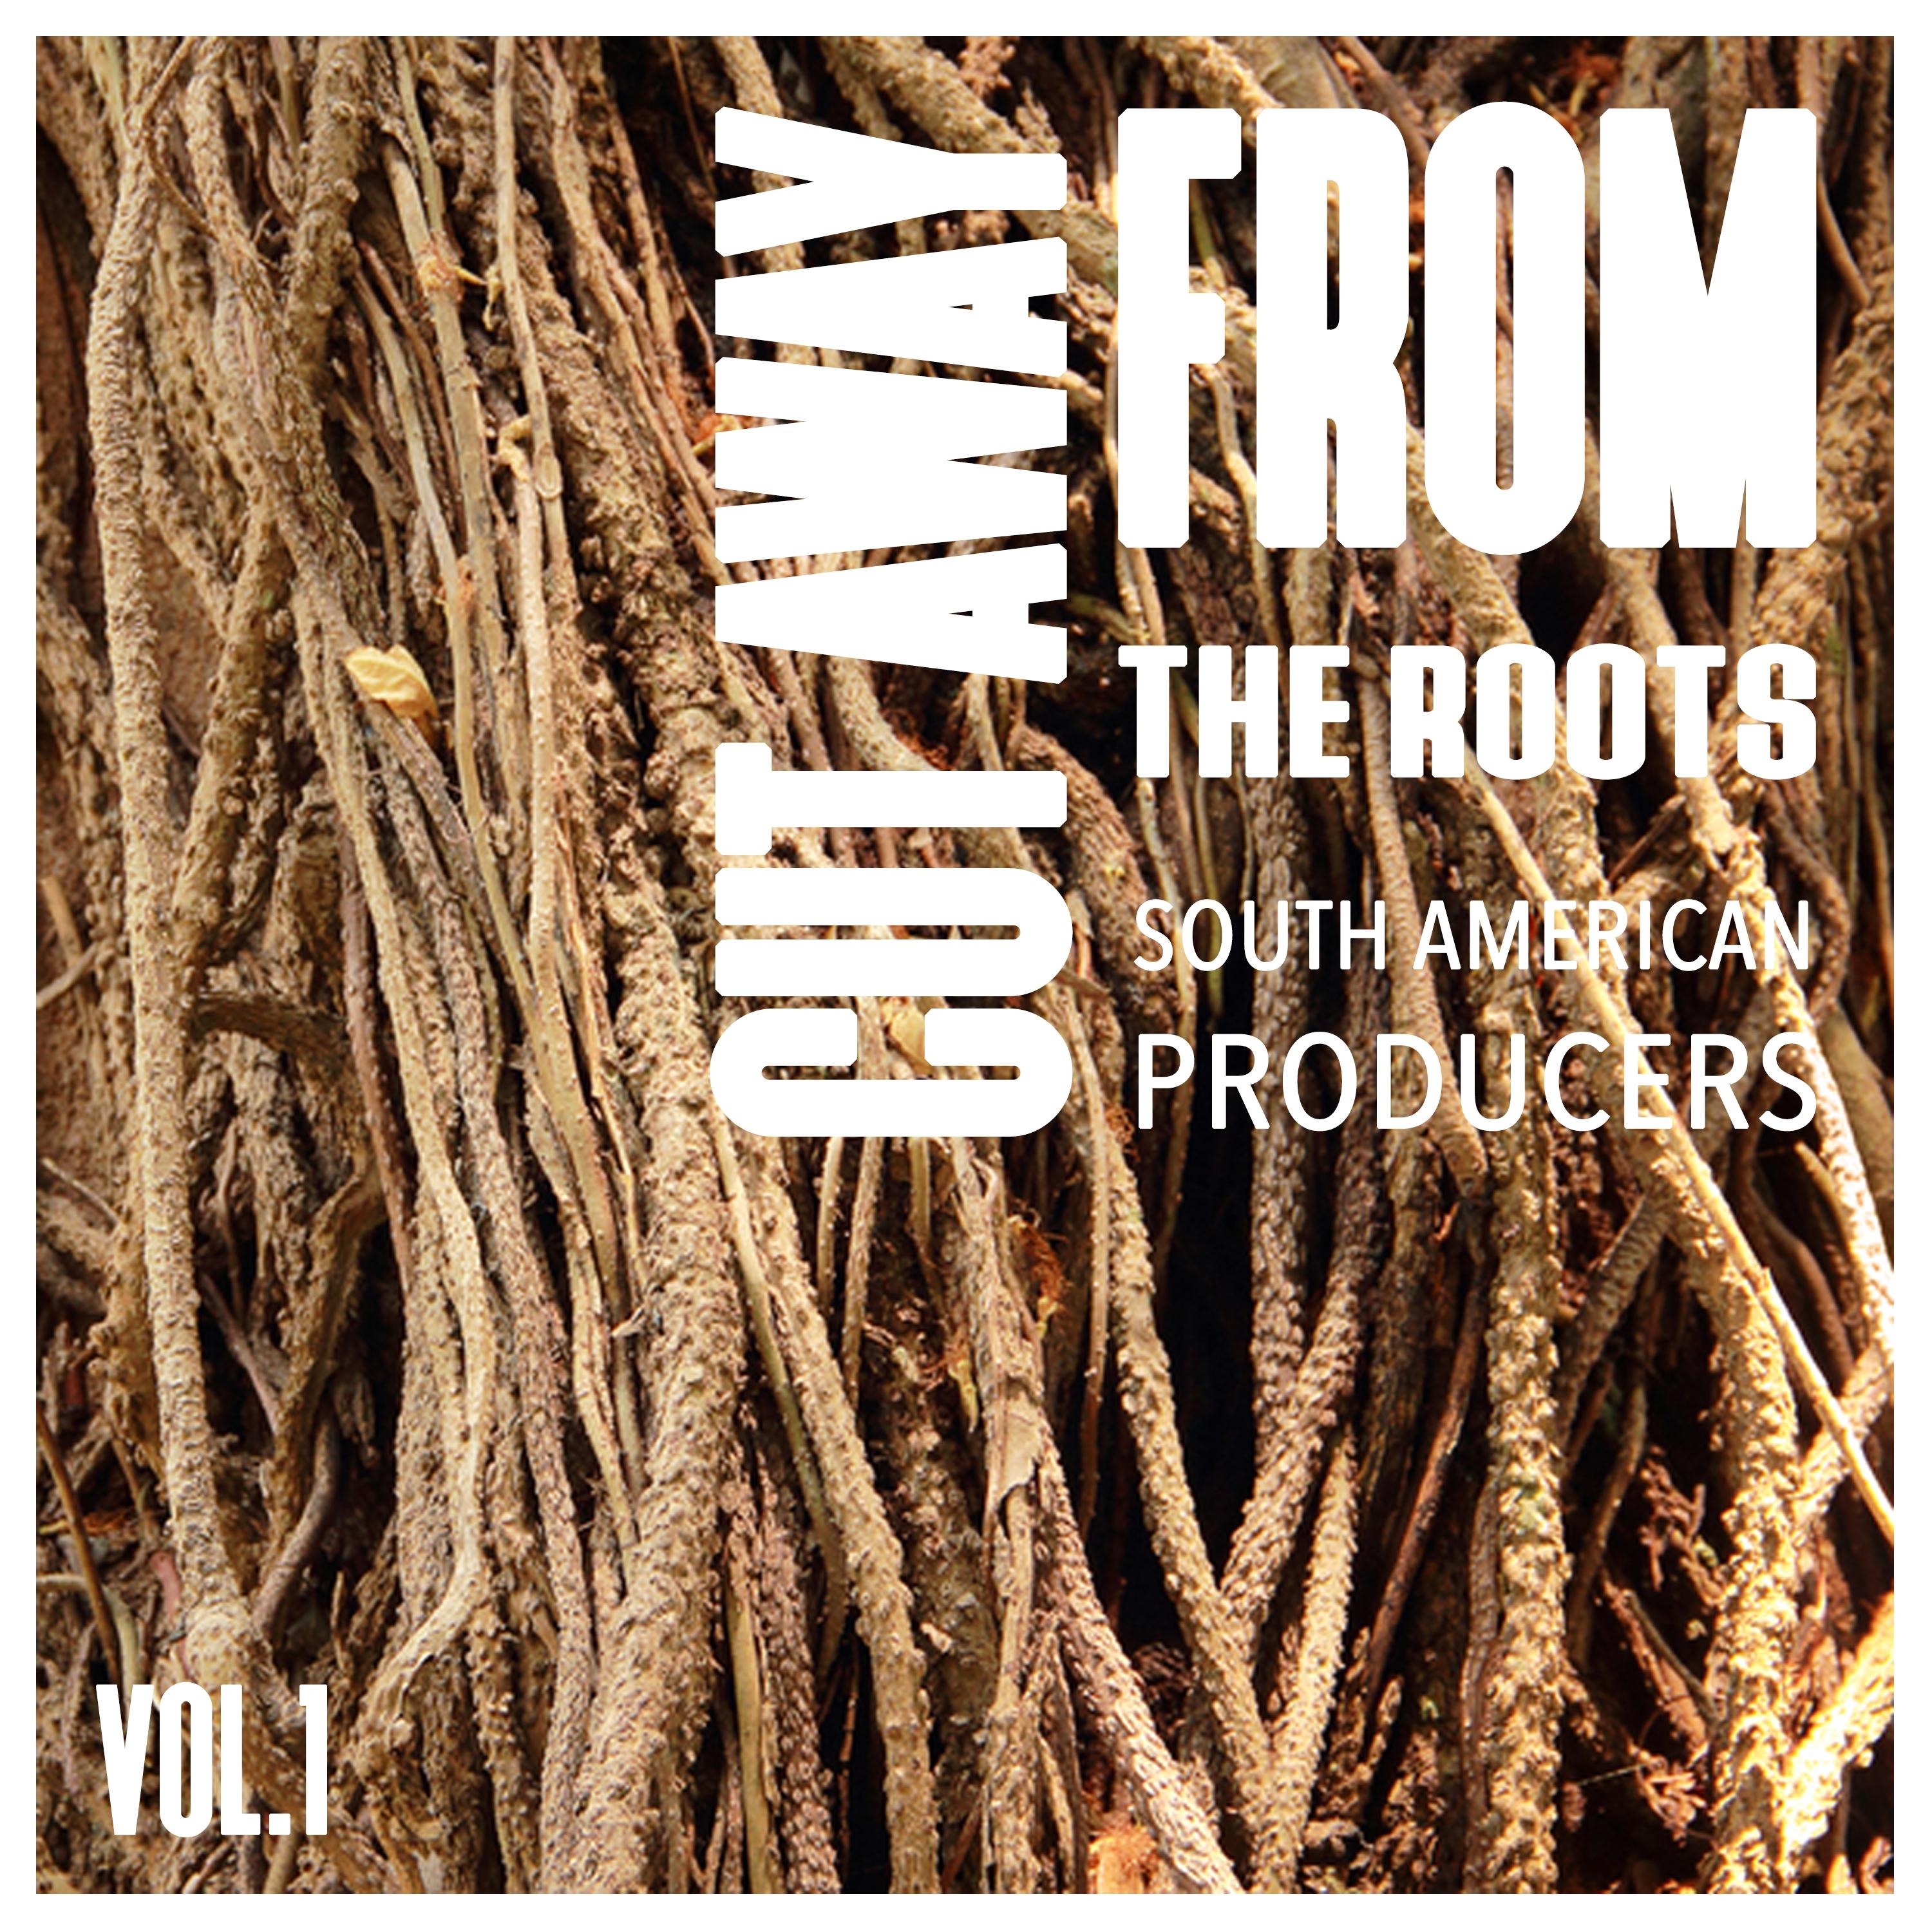 Cut Away from the Roots, Vol. 1 - Best of South American Producers